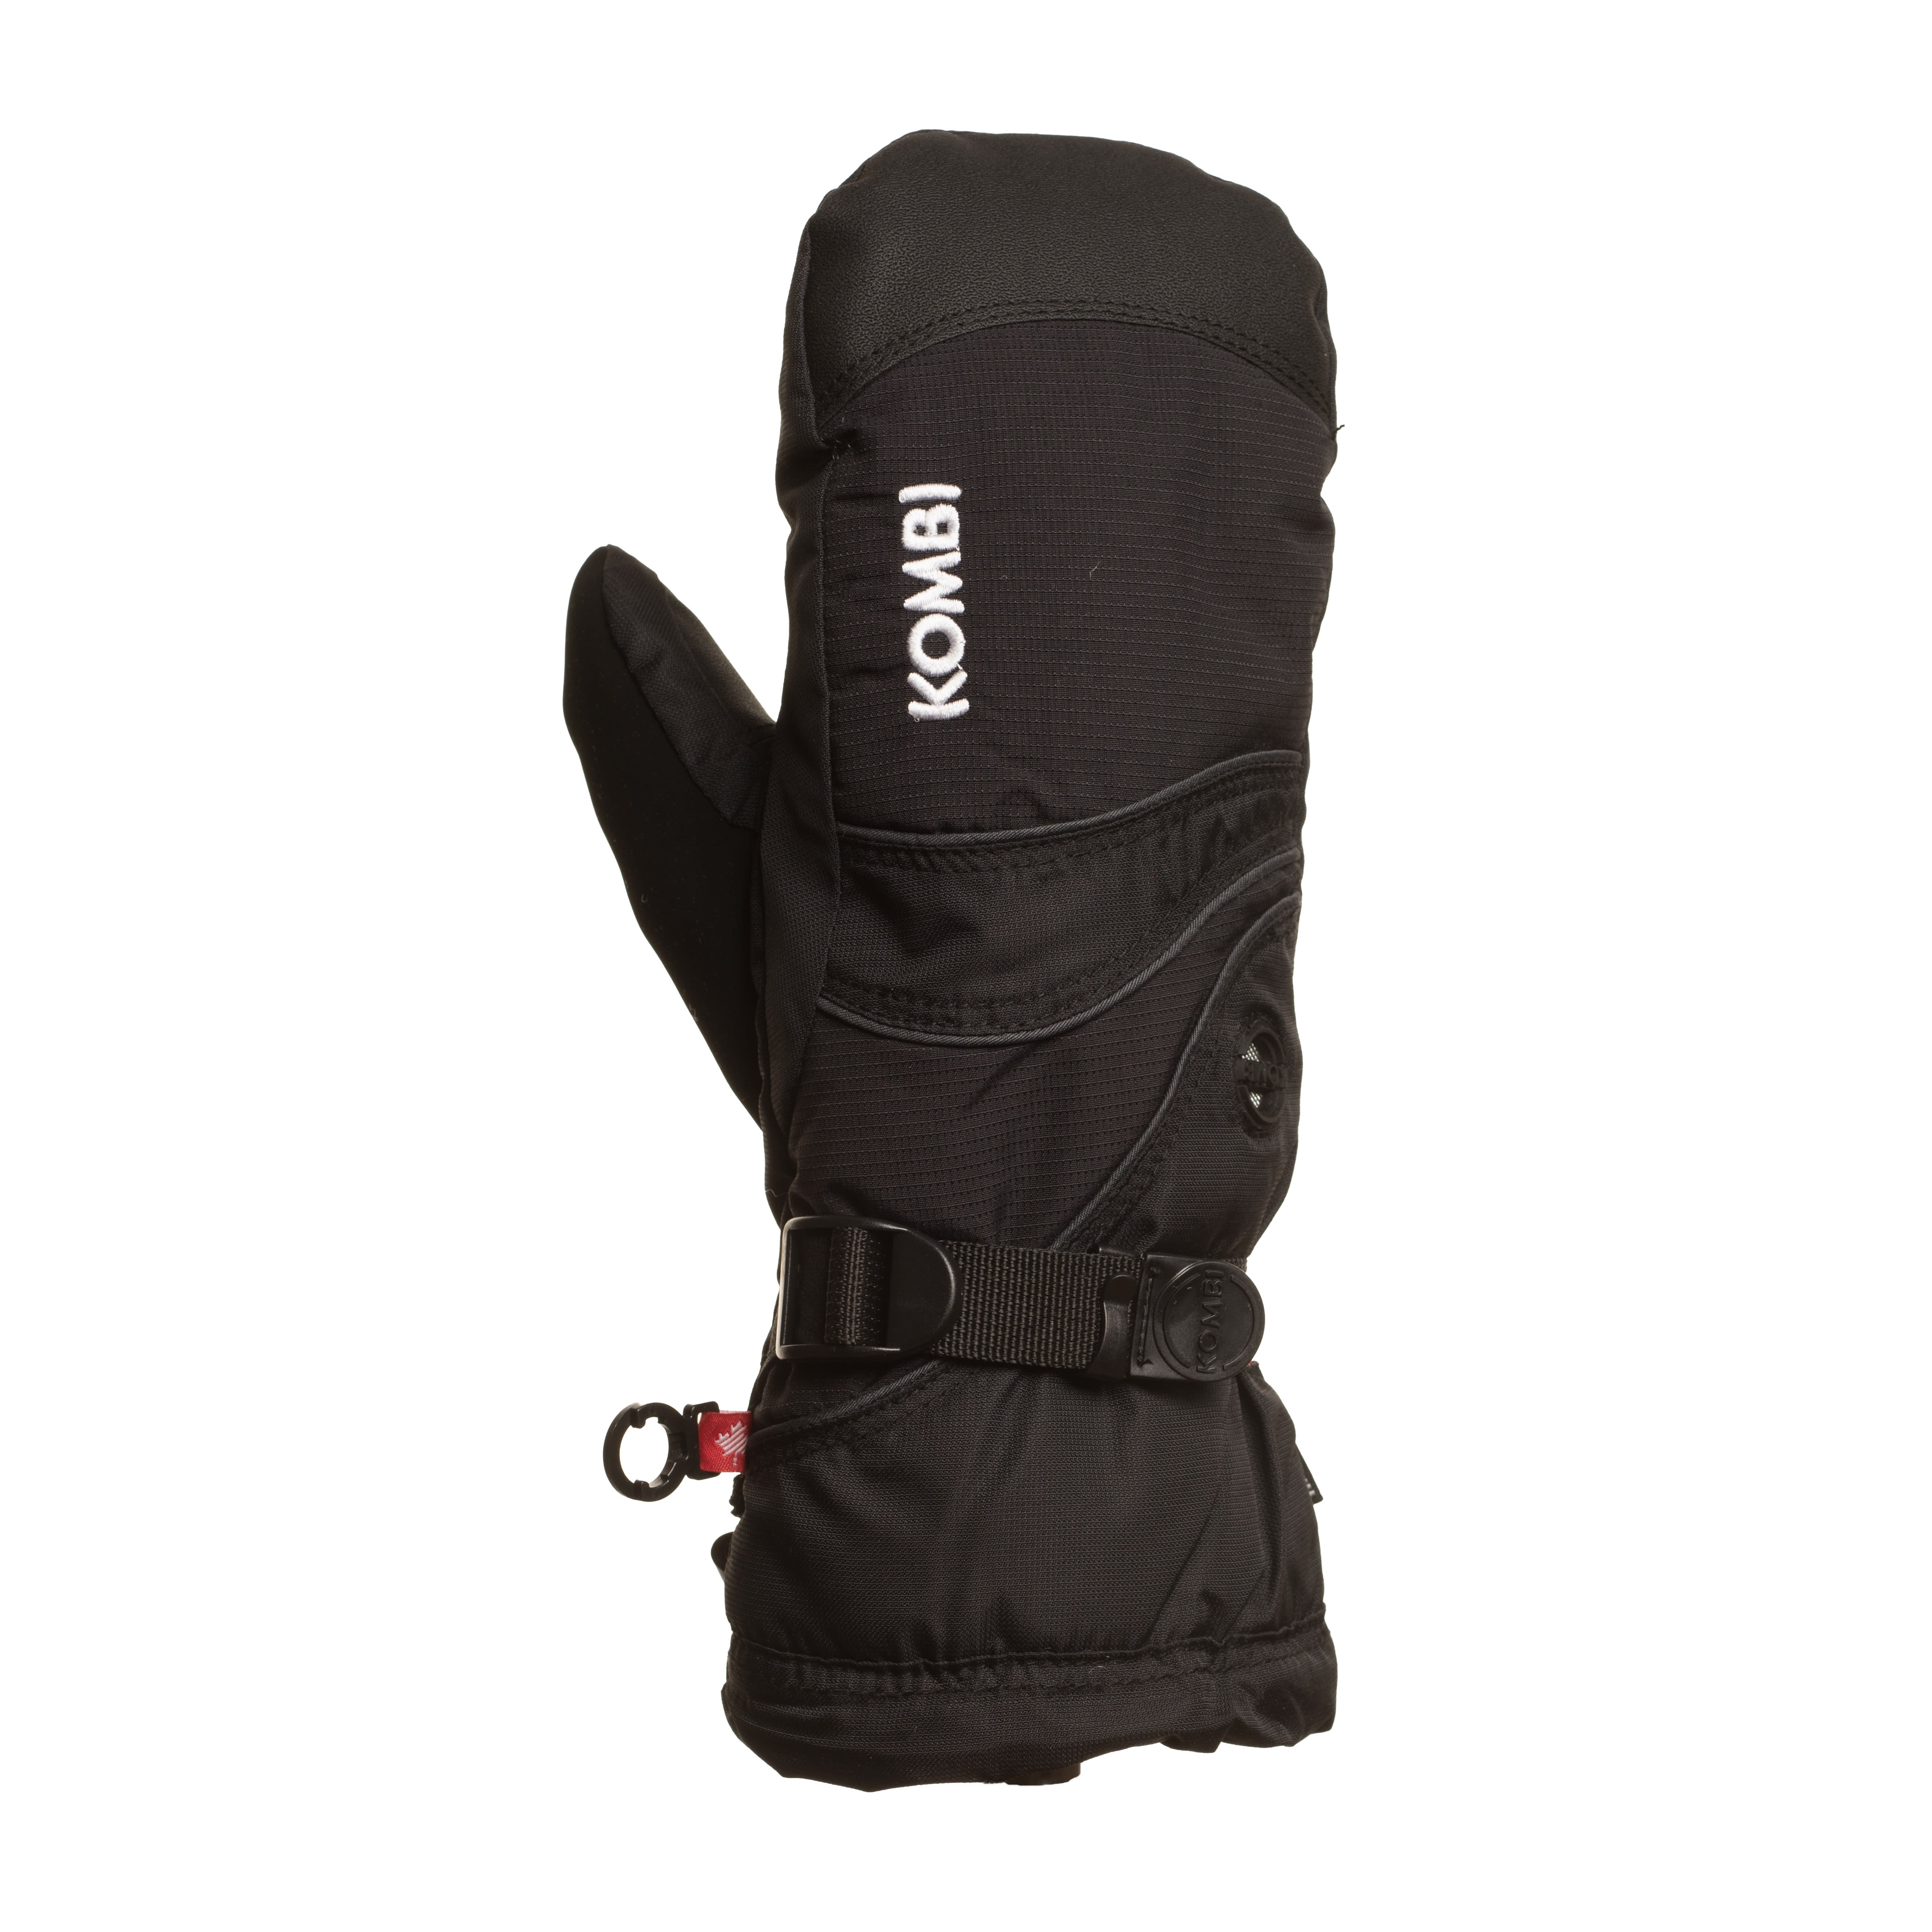 Buy Kombi Men's Squad WaterGuard Mittens from Outnorth